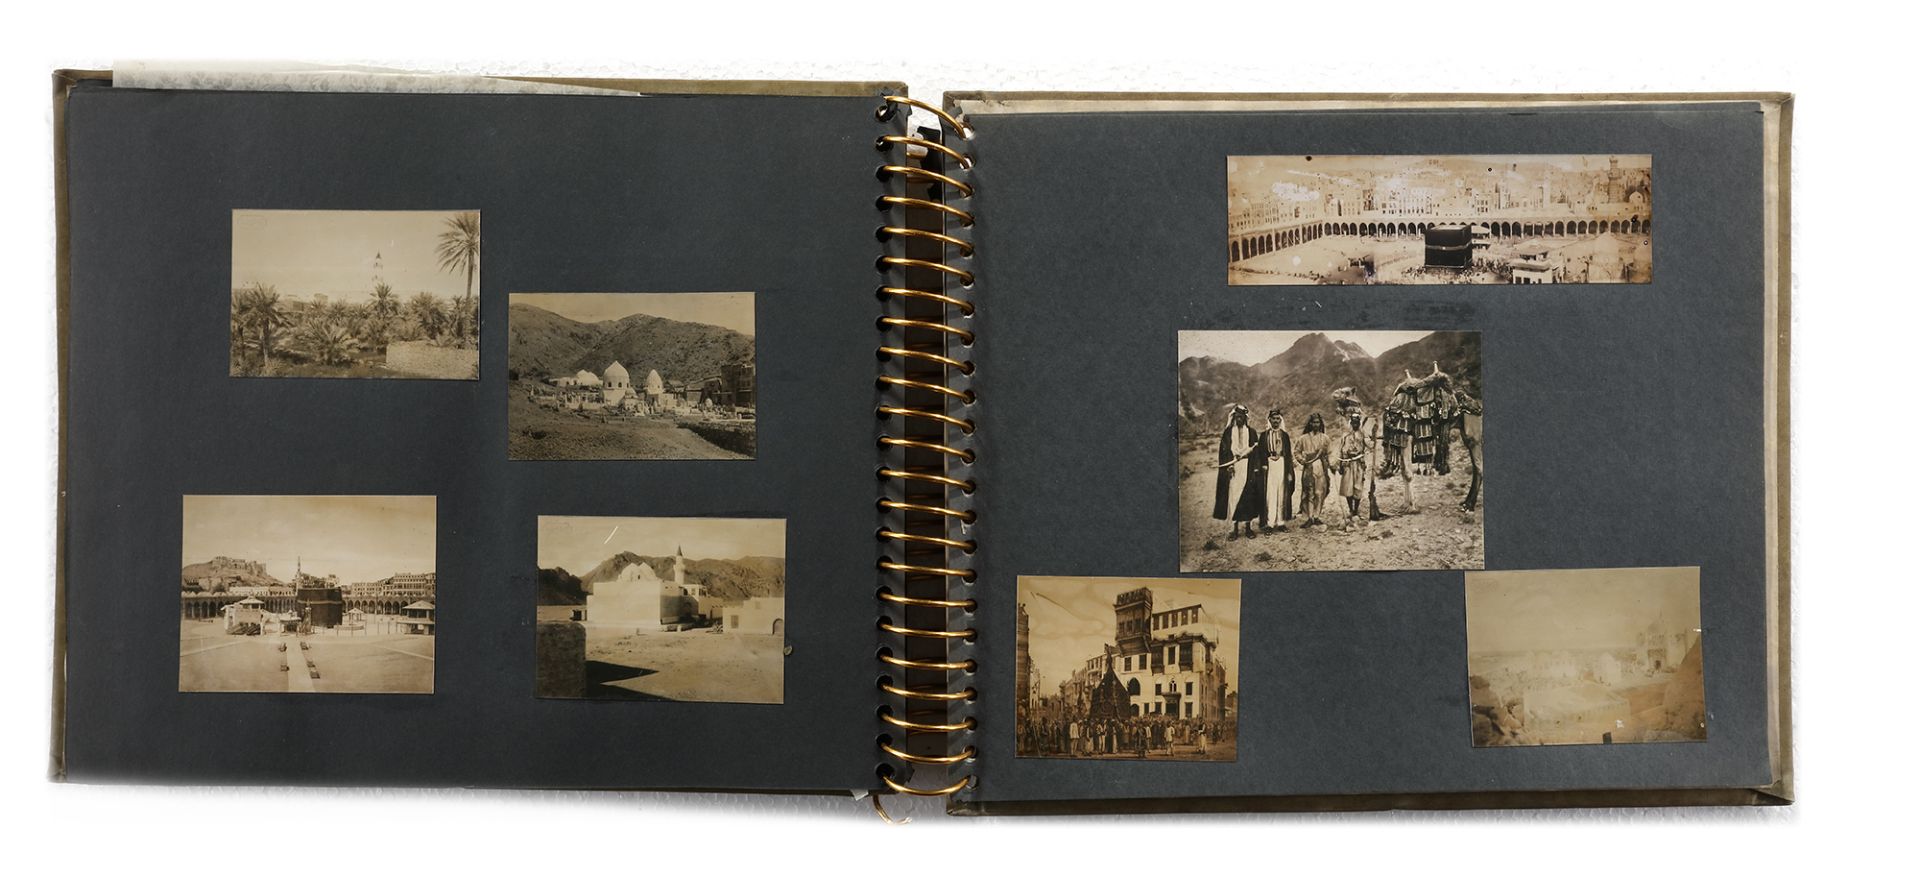 A PHOTO ALBUM WITH A COLLECTION OF 95 PHOTOS OF MECCA, MEDINA, THE MAHMAL AND THE HAJJ, EARLY 20TH C - Image 6 of 6